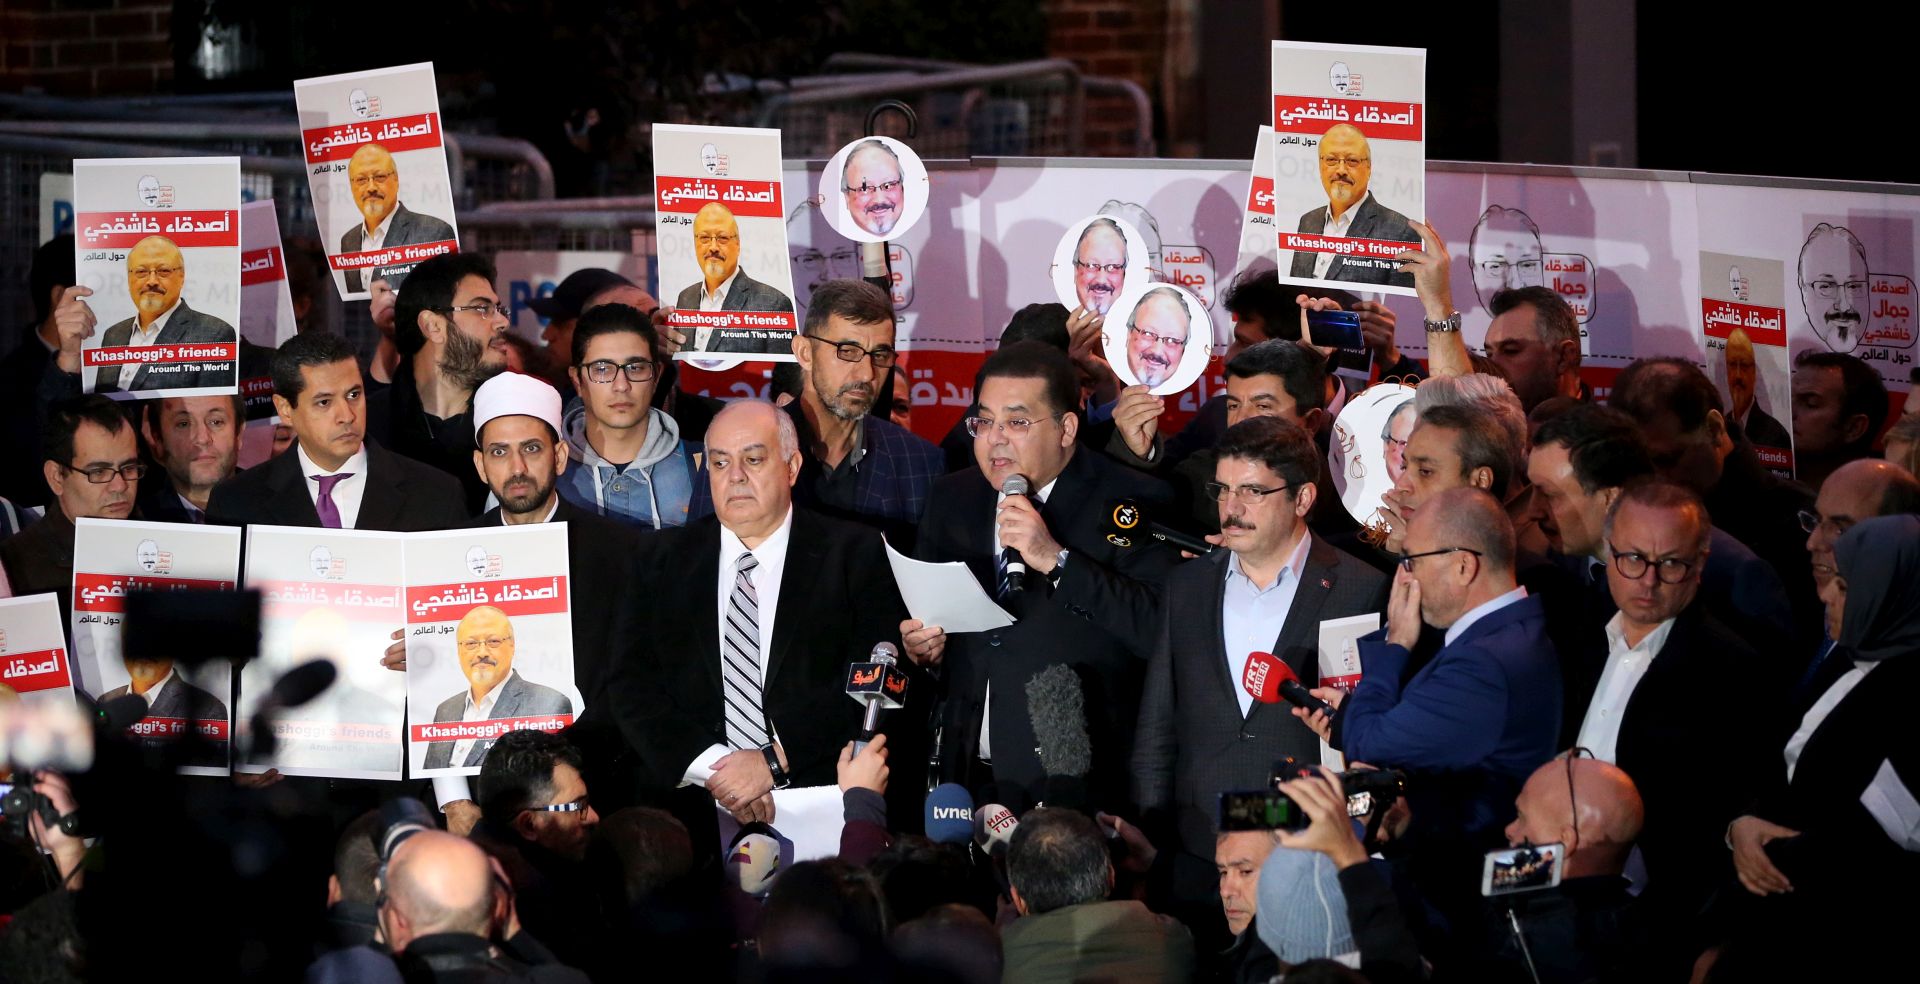 epa07119171 Former Egyptian Parliament member, Ayman Nour (C), who is living in exile in Turkey, speaks during the demonstration in front of Saudi Arabian consulate in Istanbul, Turkey, 25 October 2018. Turkish President Erdogan addressed the parliament on the case of Saudi journalist Jamaal Khashoggi on 23 October 2018, media reported that he said that Turkish investigators have strong evidence that Khashoggi's death was planned, and demanded that the whereabouts of the dead journalist's body be revealed and the suspects face trial in Turkey. Saudi Arabian official media on 19 October reported that journalists Jamal Khashoggi died as a result of a physical altercation inside the kingdom's consulate in Istanbul, where he was last seen entering on 02 October for routine paperwork. On 24 October, Mohammed bin Salman spoke of the killing of Khashoggi for the first time, describing it as 'a heinous crime that cannot be justified', and that Saudi Arabia and Turkey will work together to punish all culprits.  EPA/ERDEM SAHIN